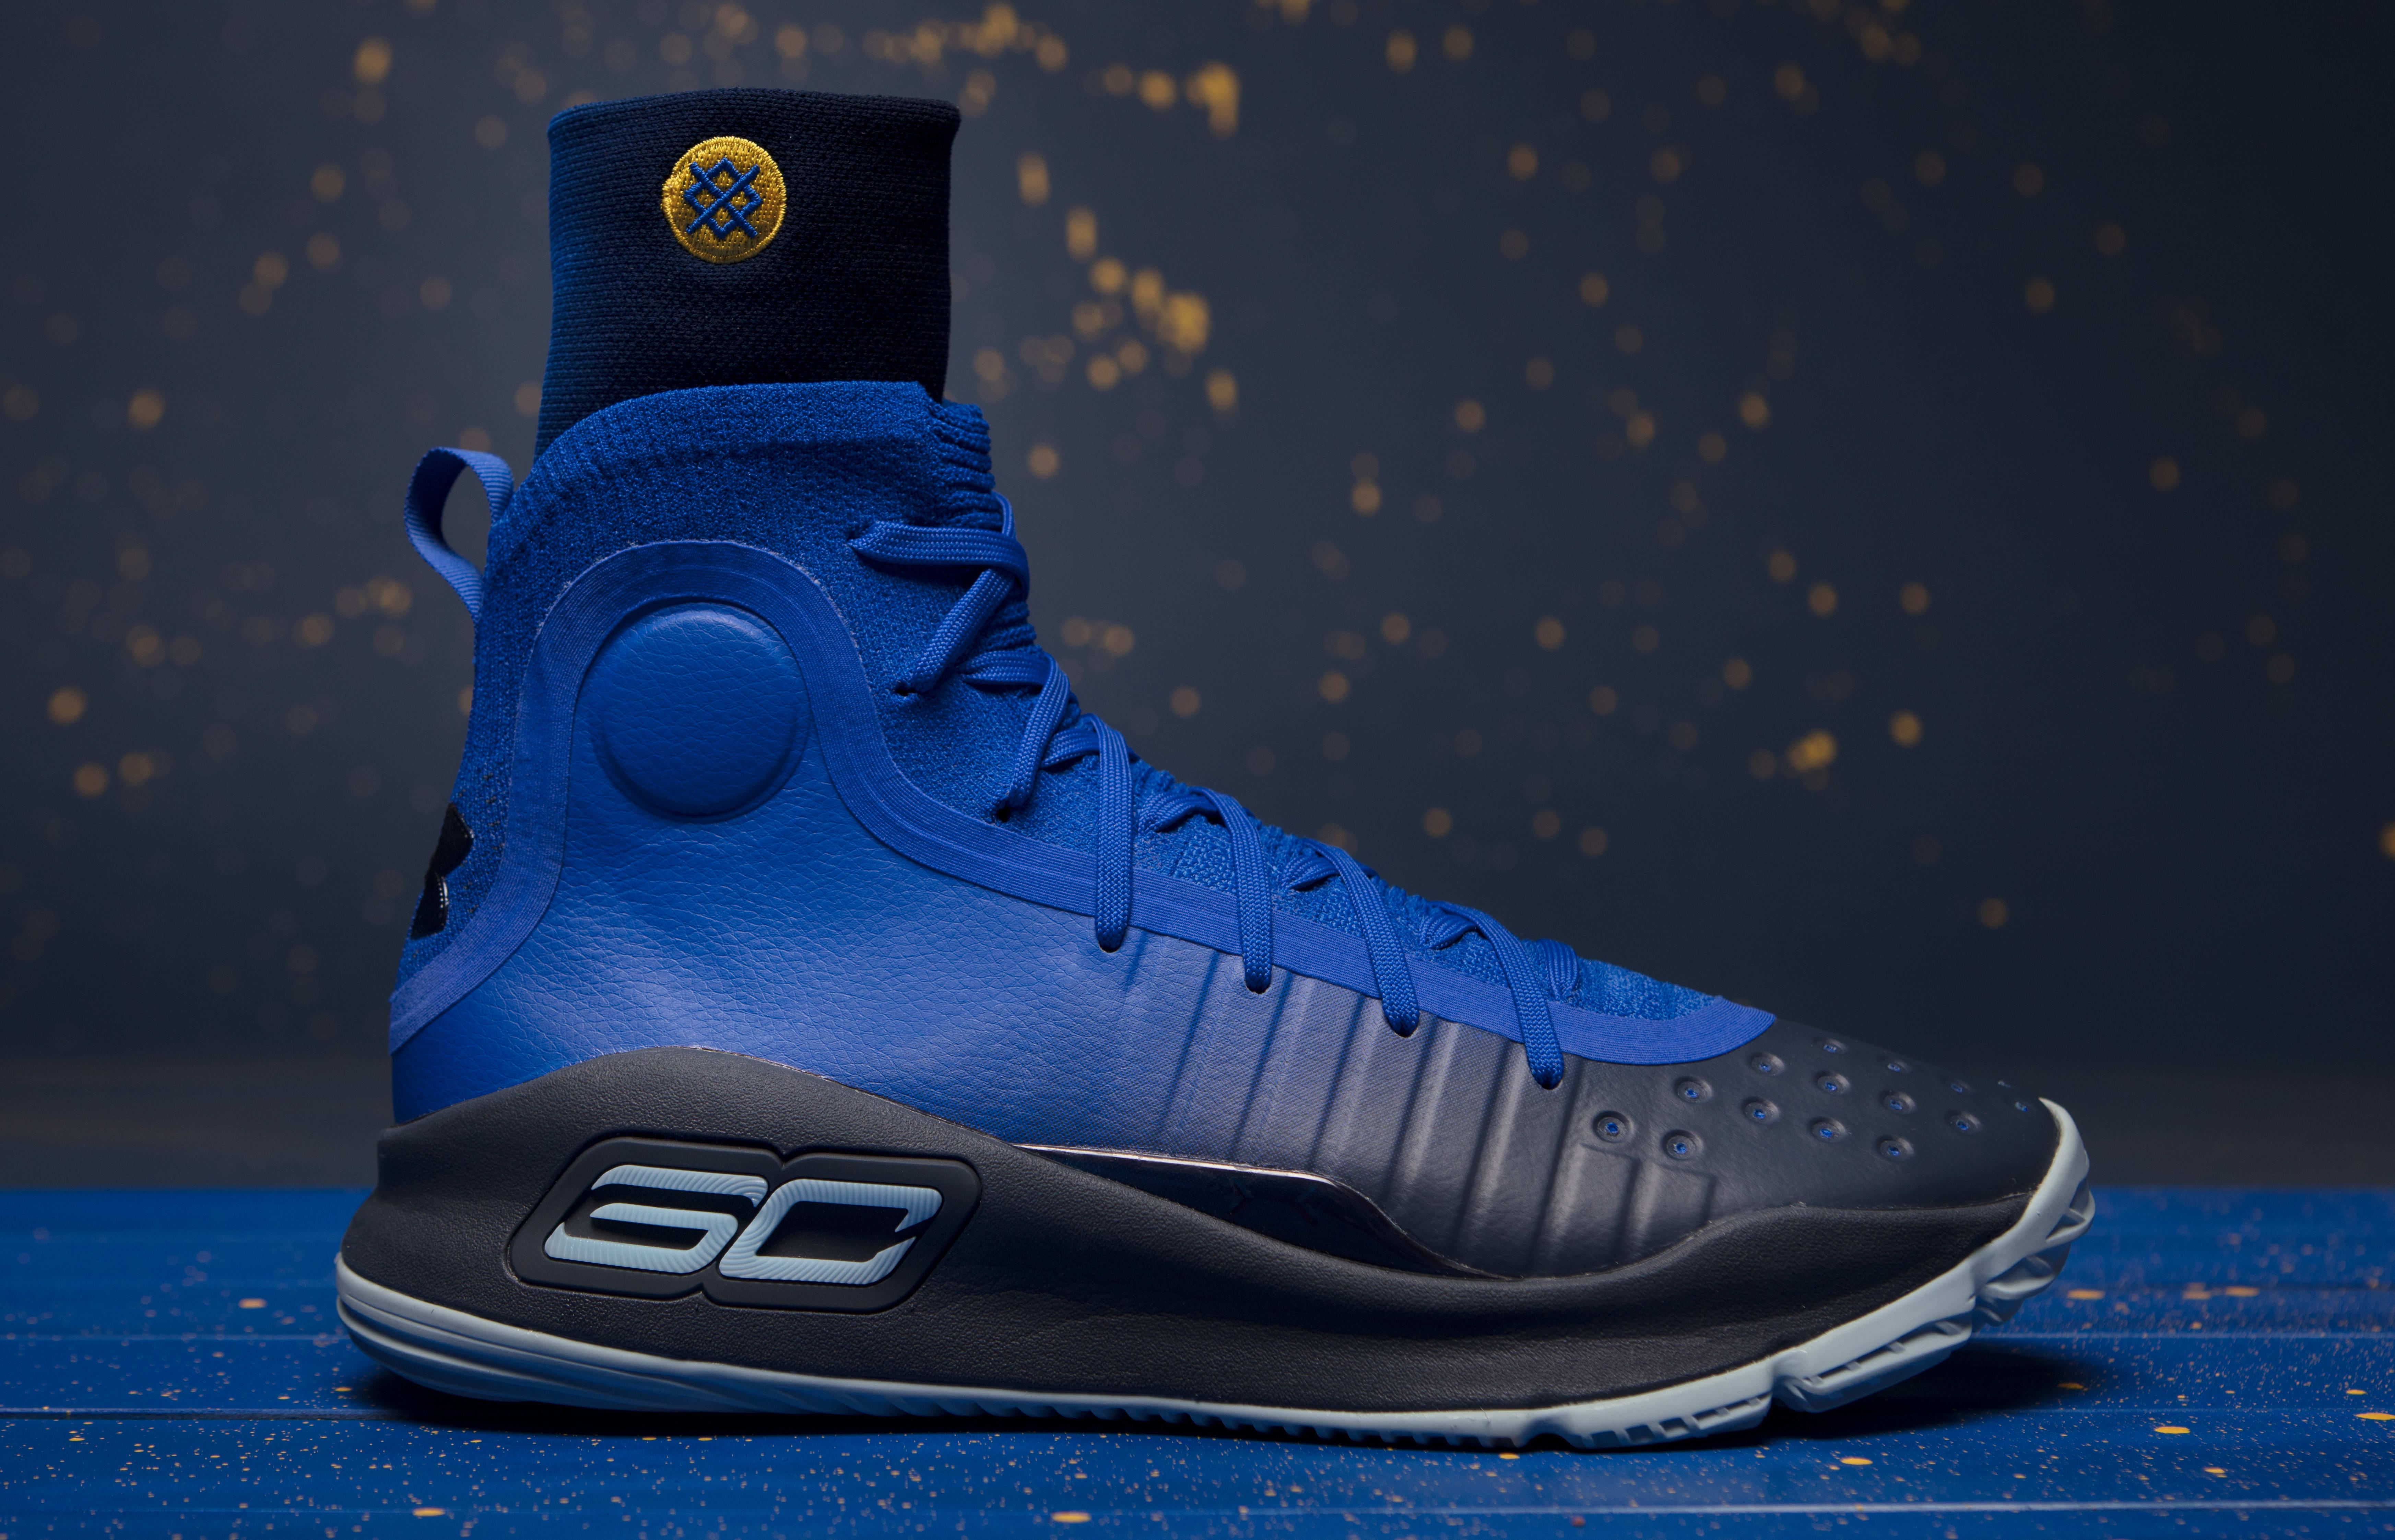 Under Armour Curry 4 &#x27;More Fun&#x27; 1298306-401 x Stance 1326667-400 Capsule 3